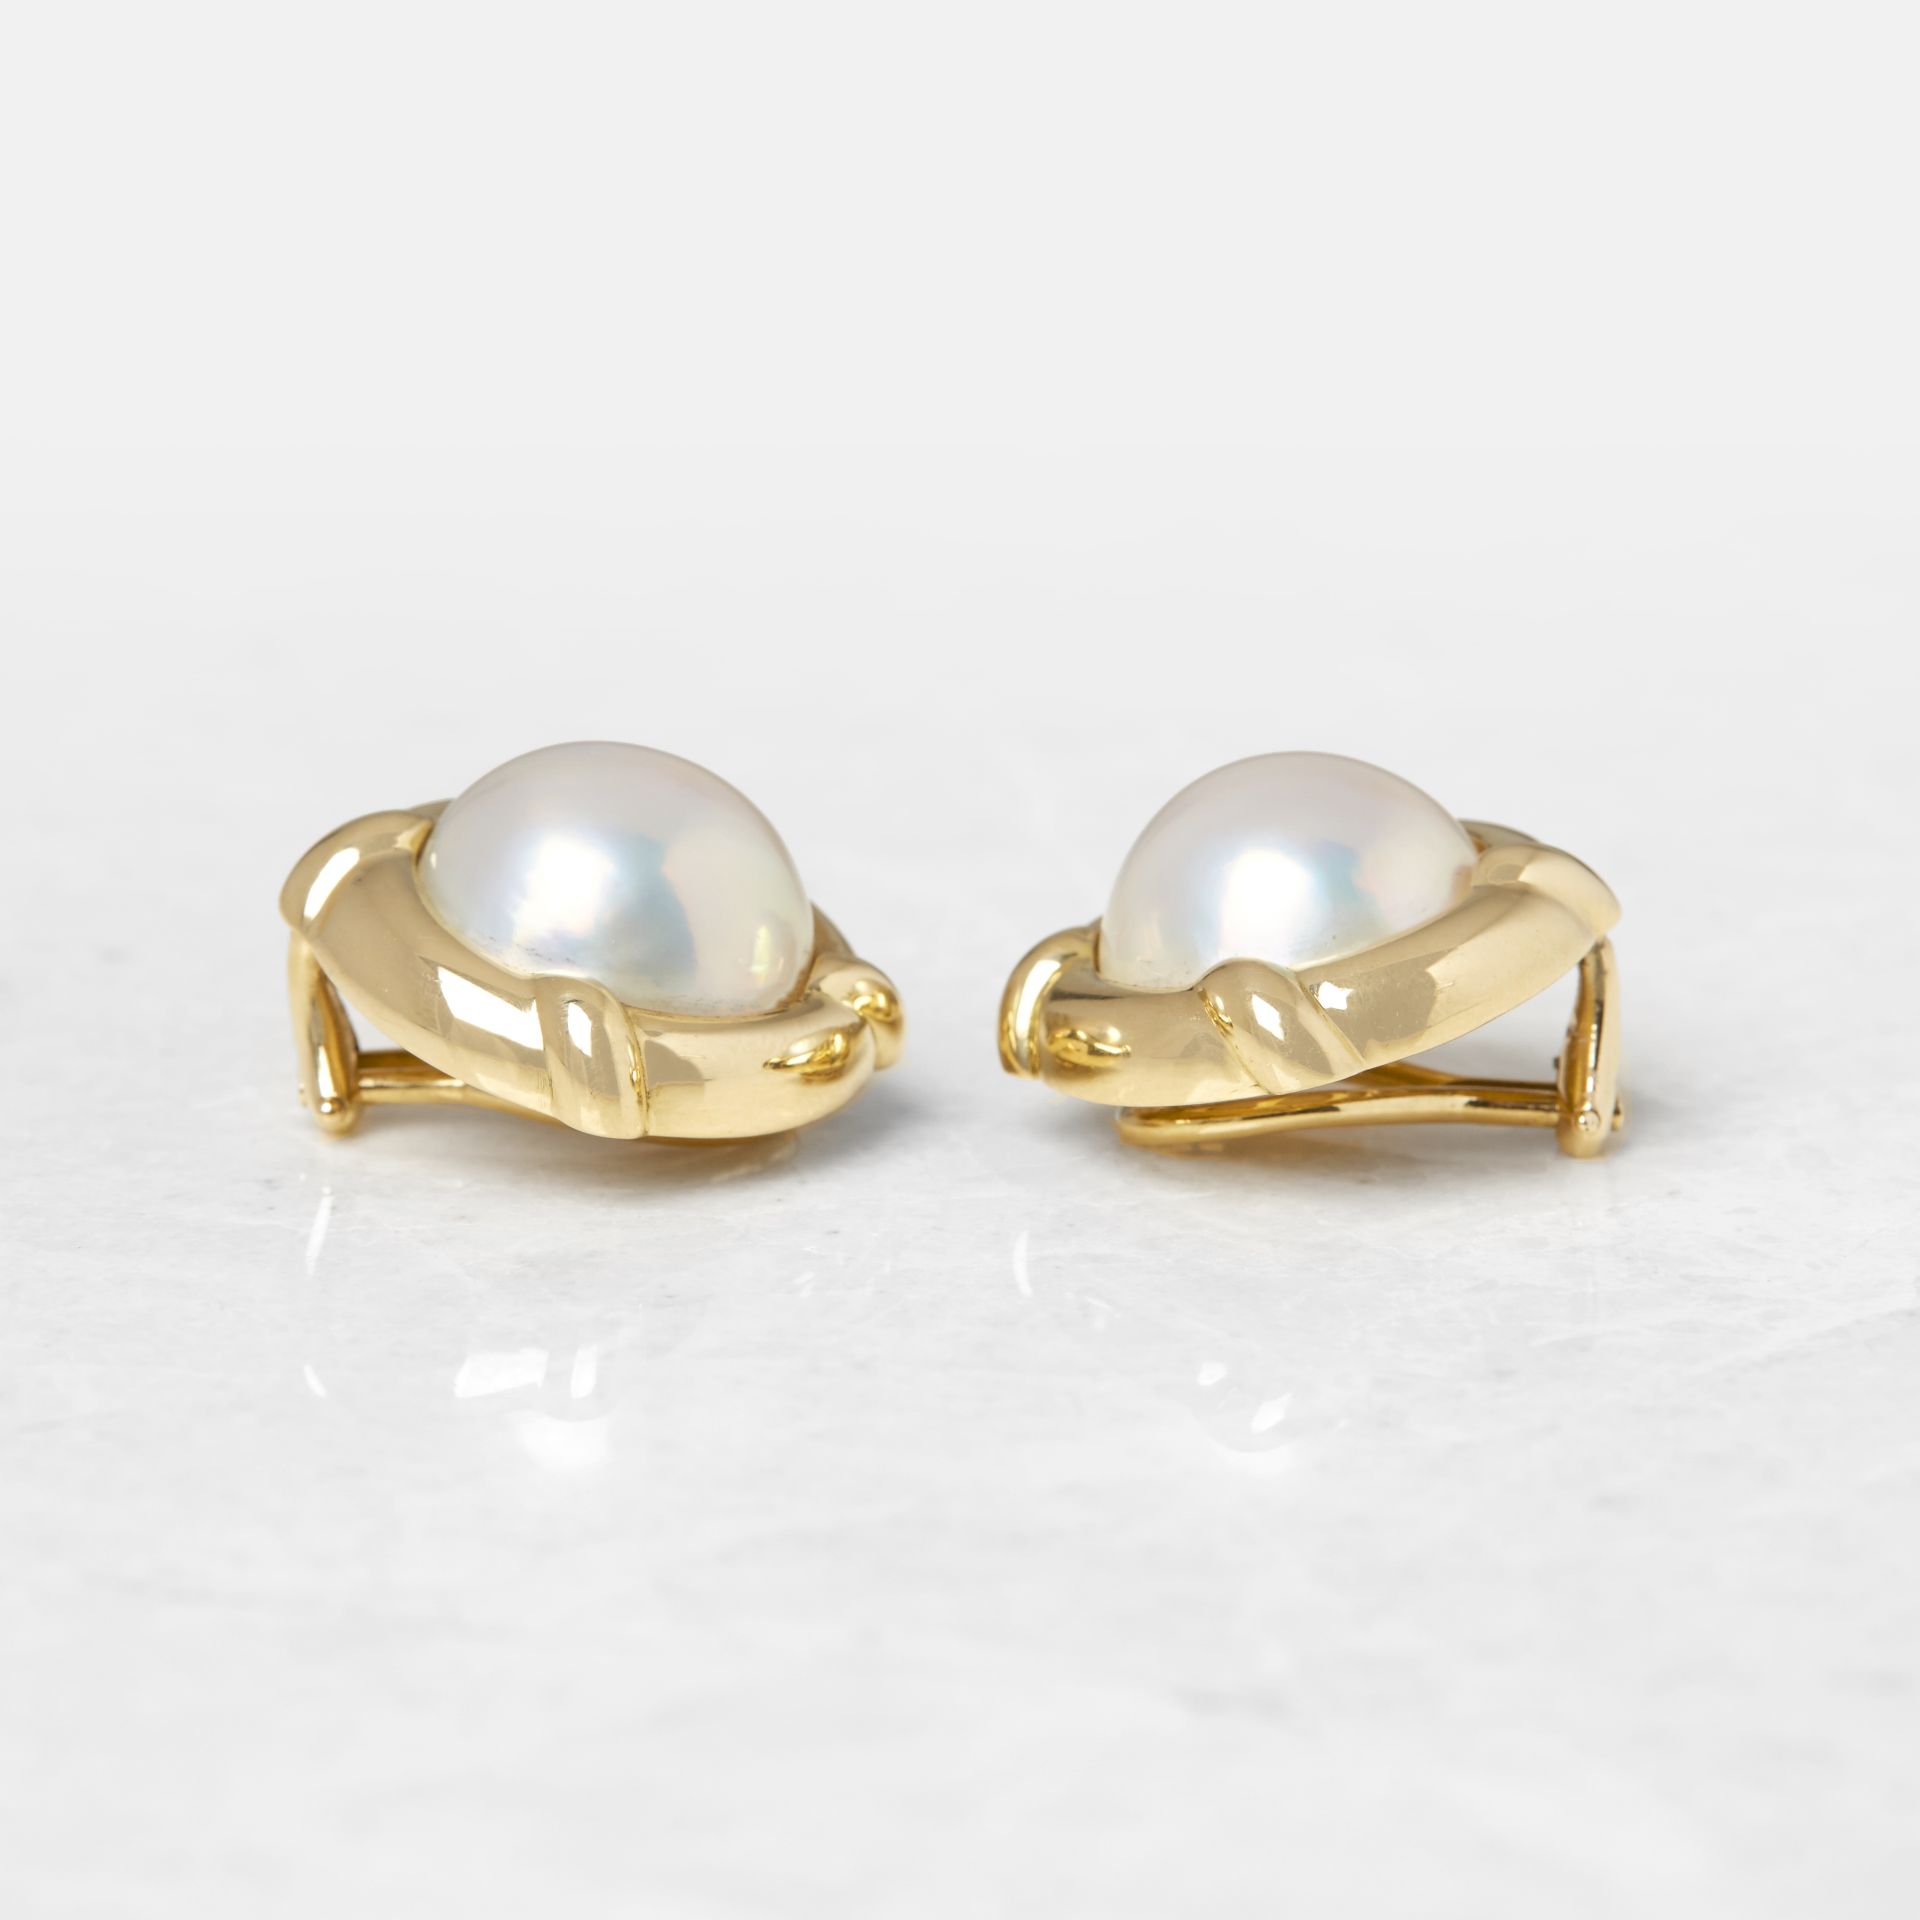 Tiffany & Co. 18k Yellow Gold Mabe Pearl Earrings - Image 11 of 15